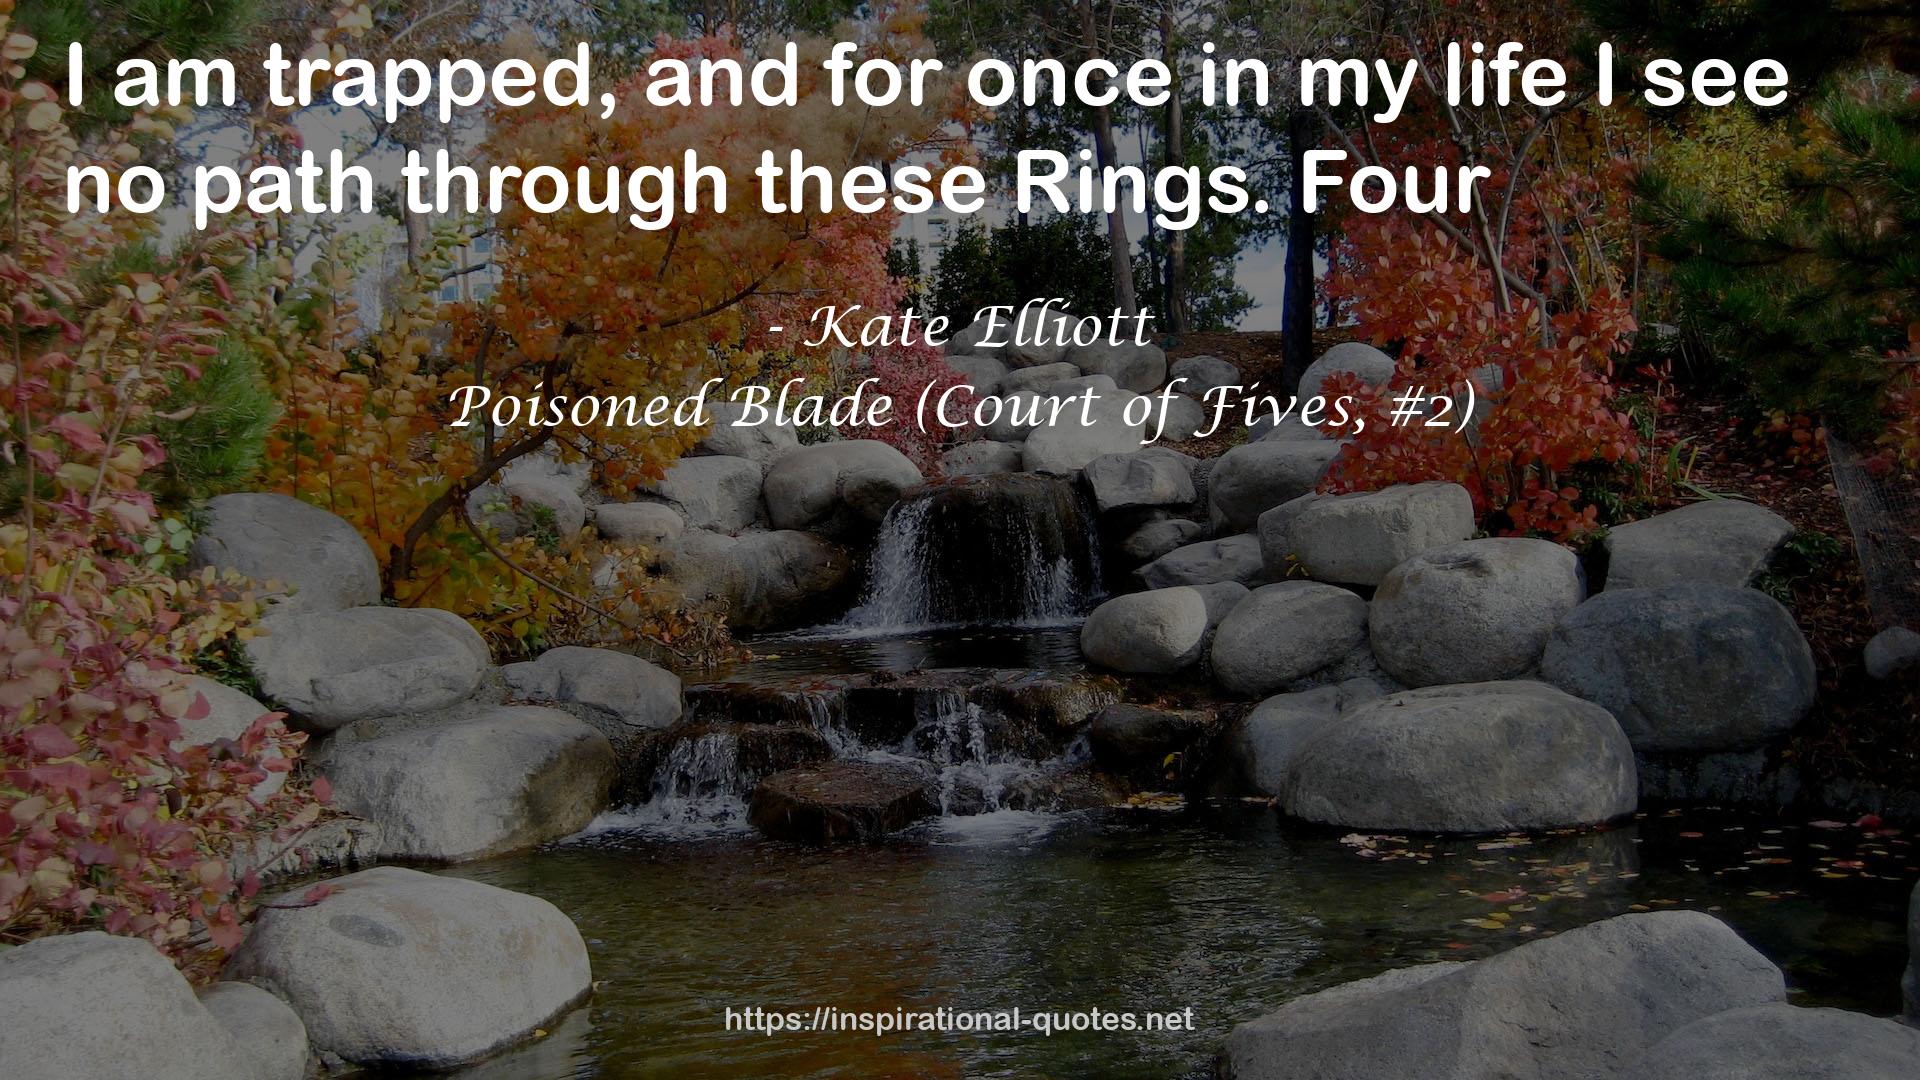 Poisoned Blade (Court of Fives, #2) QUOTES